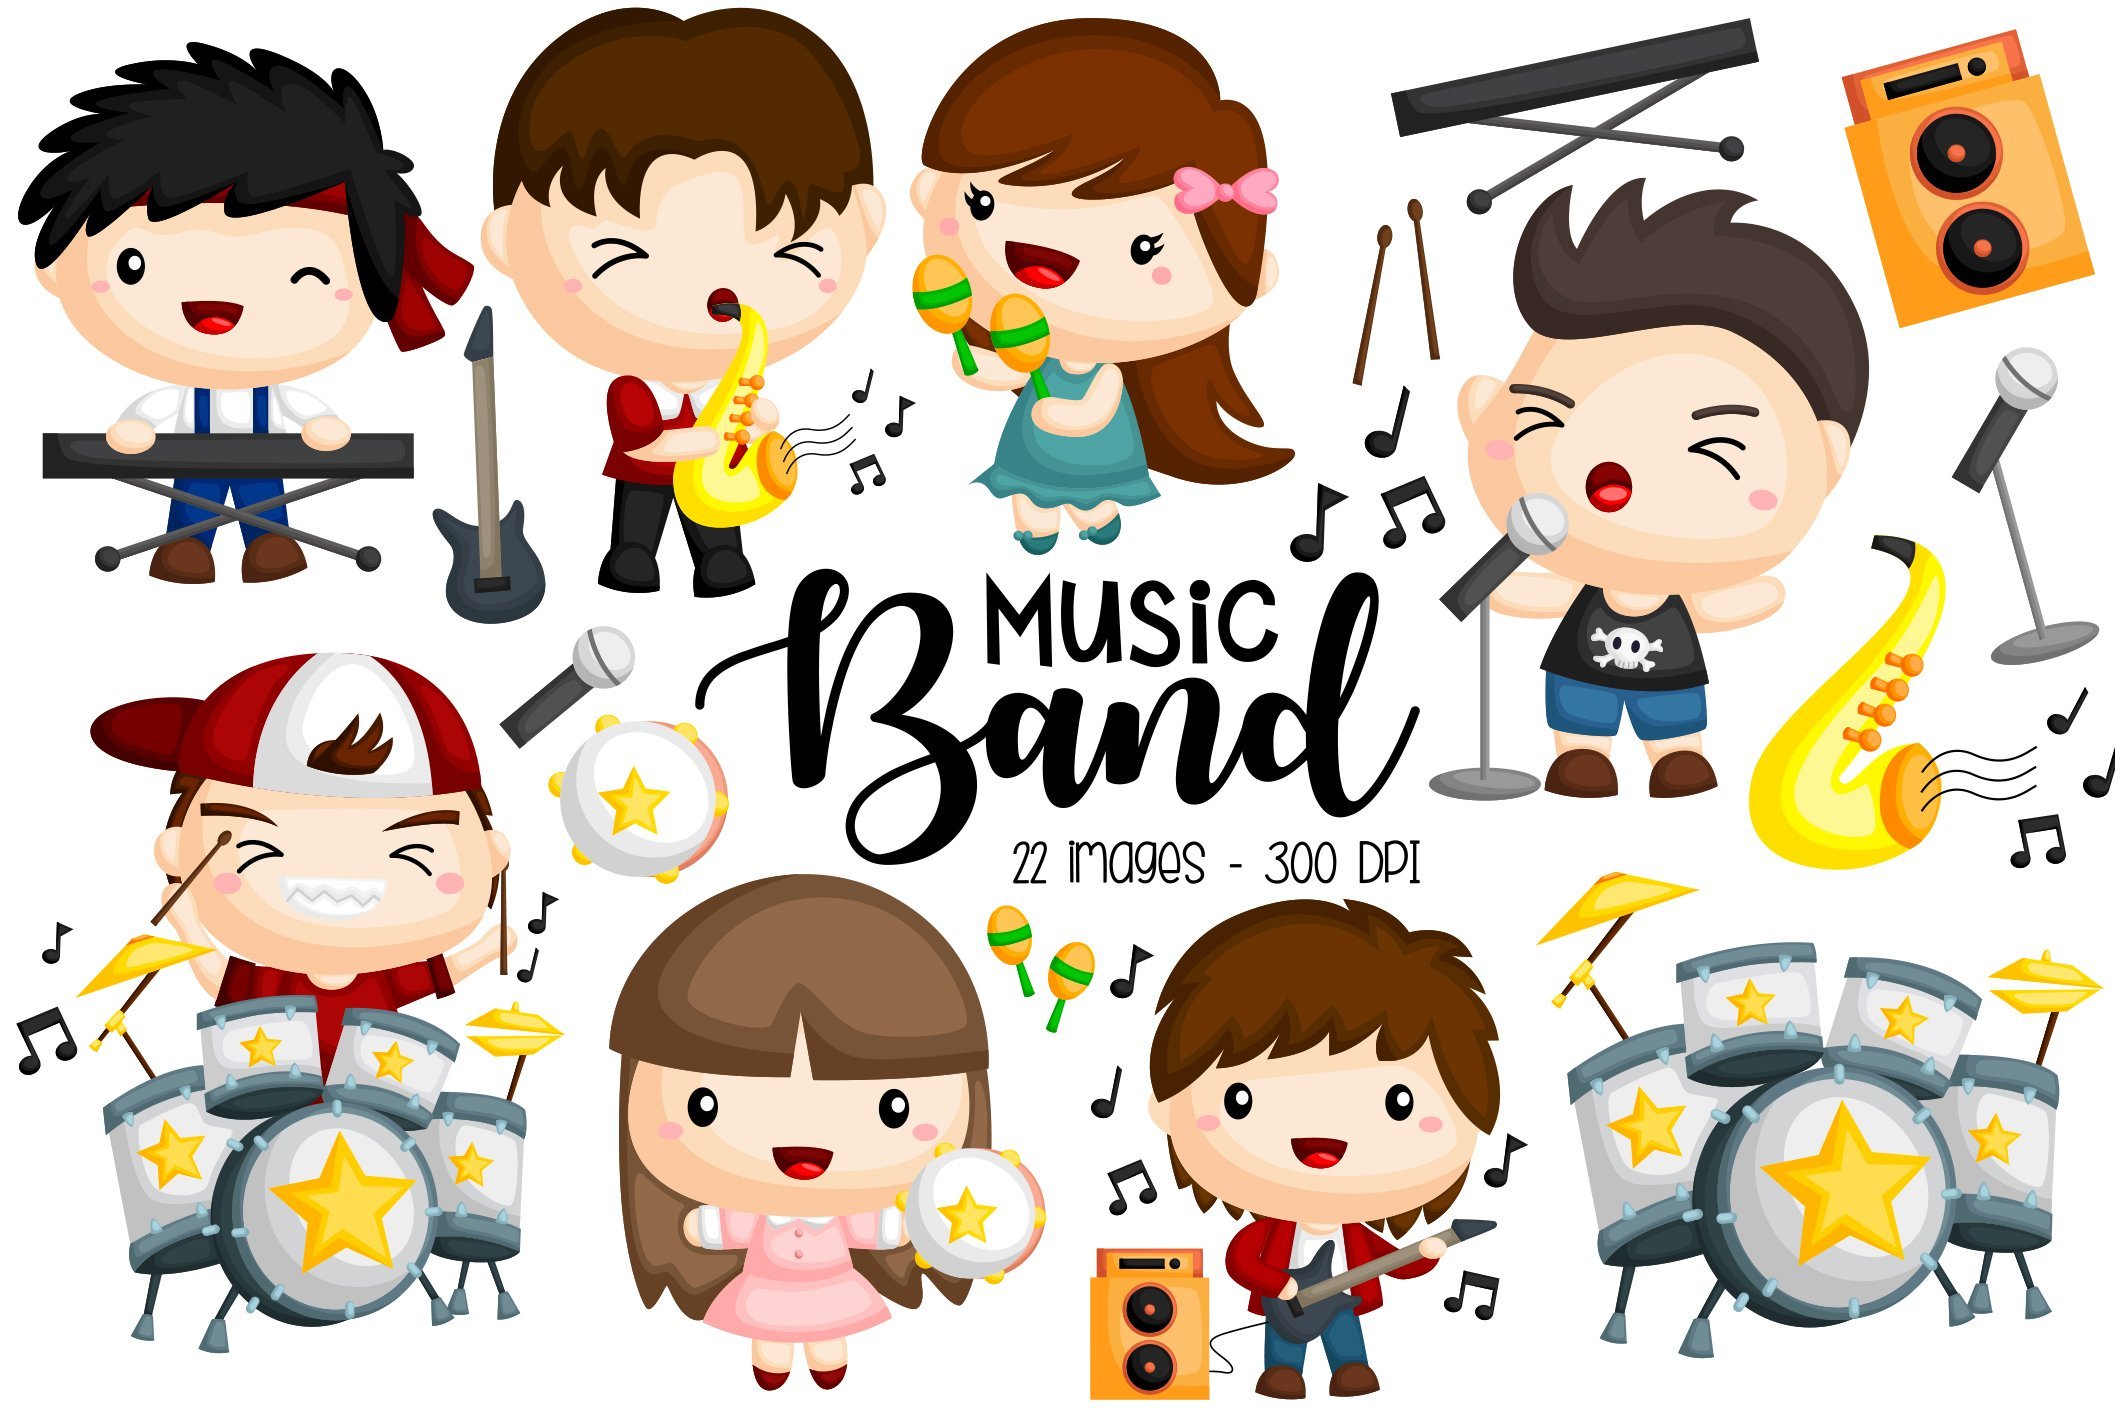 Music Band Clipart - Band Player cover image.